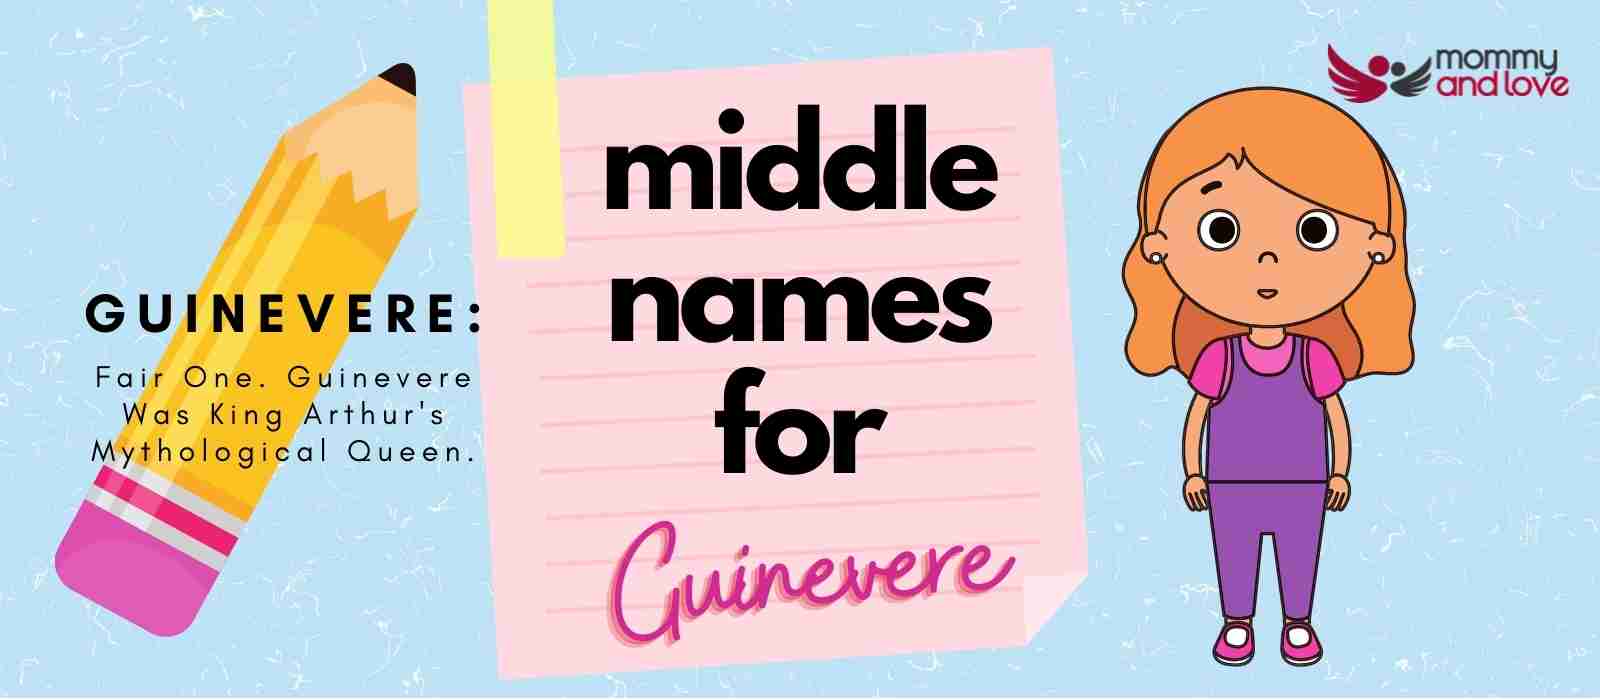 Middle Names for Guinevere